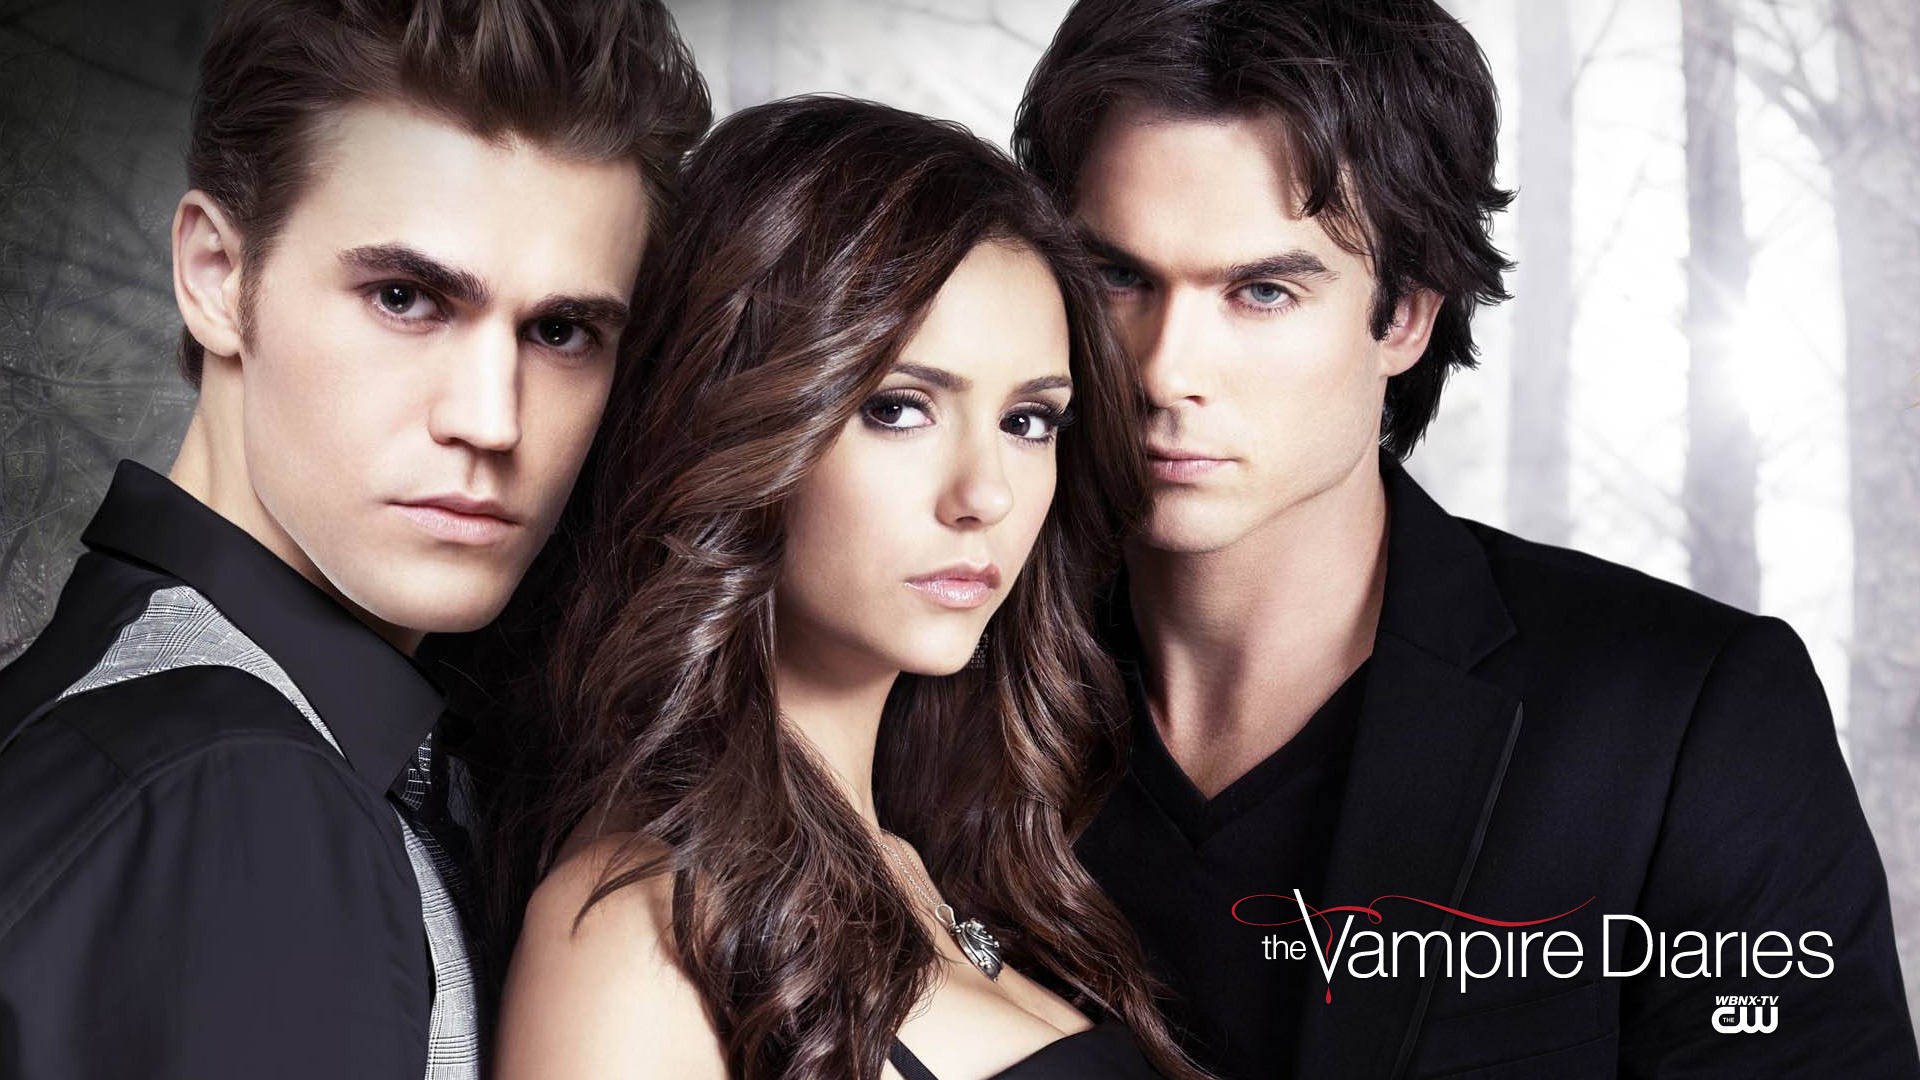 The Vampire Diaries HD Wallpapers #1 - 1920x1080